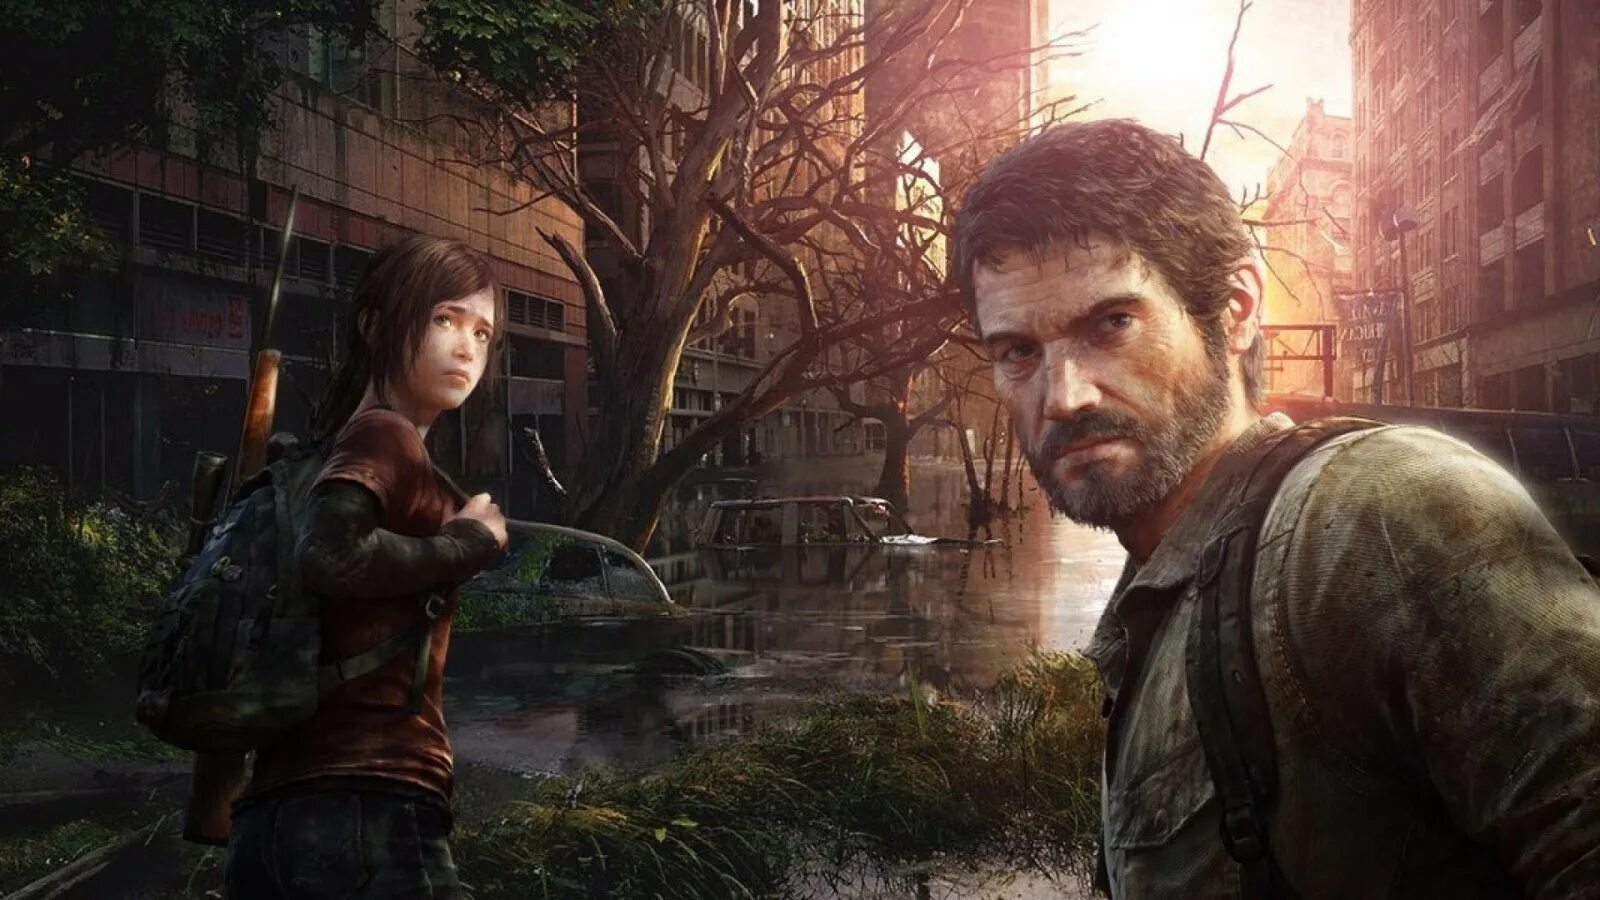 Download the last of us. Одни из нас (the last of us) ps4. The last of us ремейк. Джоэл the last of us Remake.